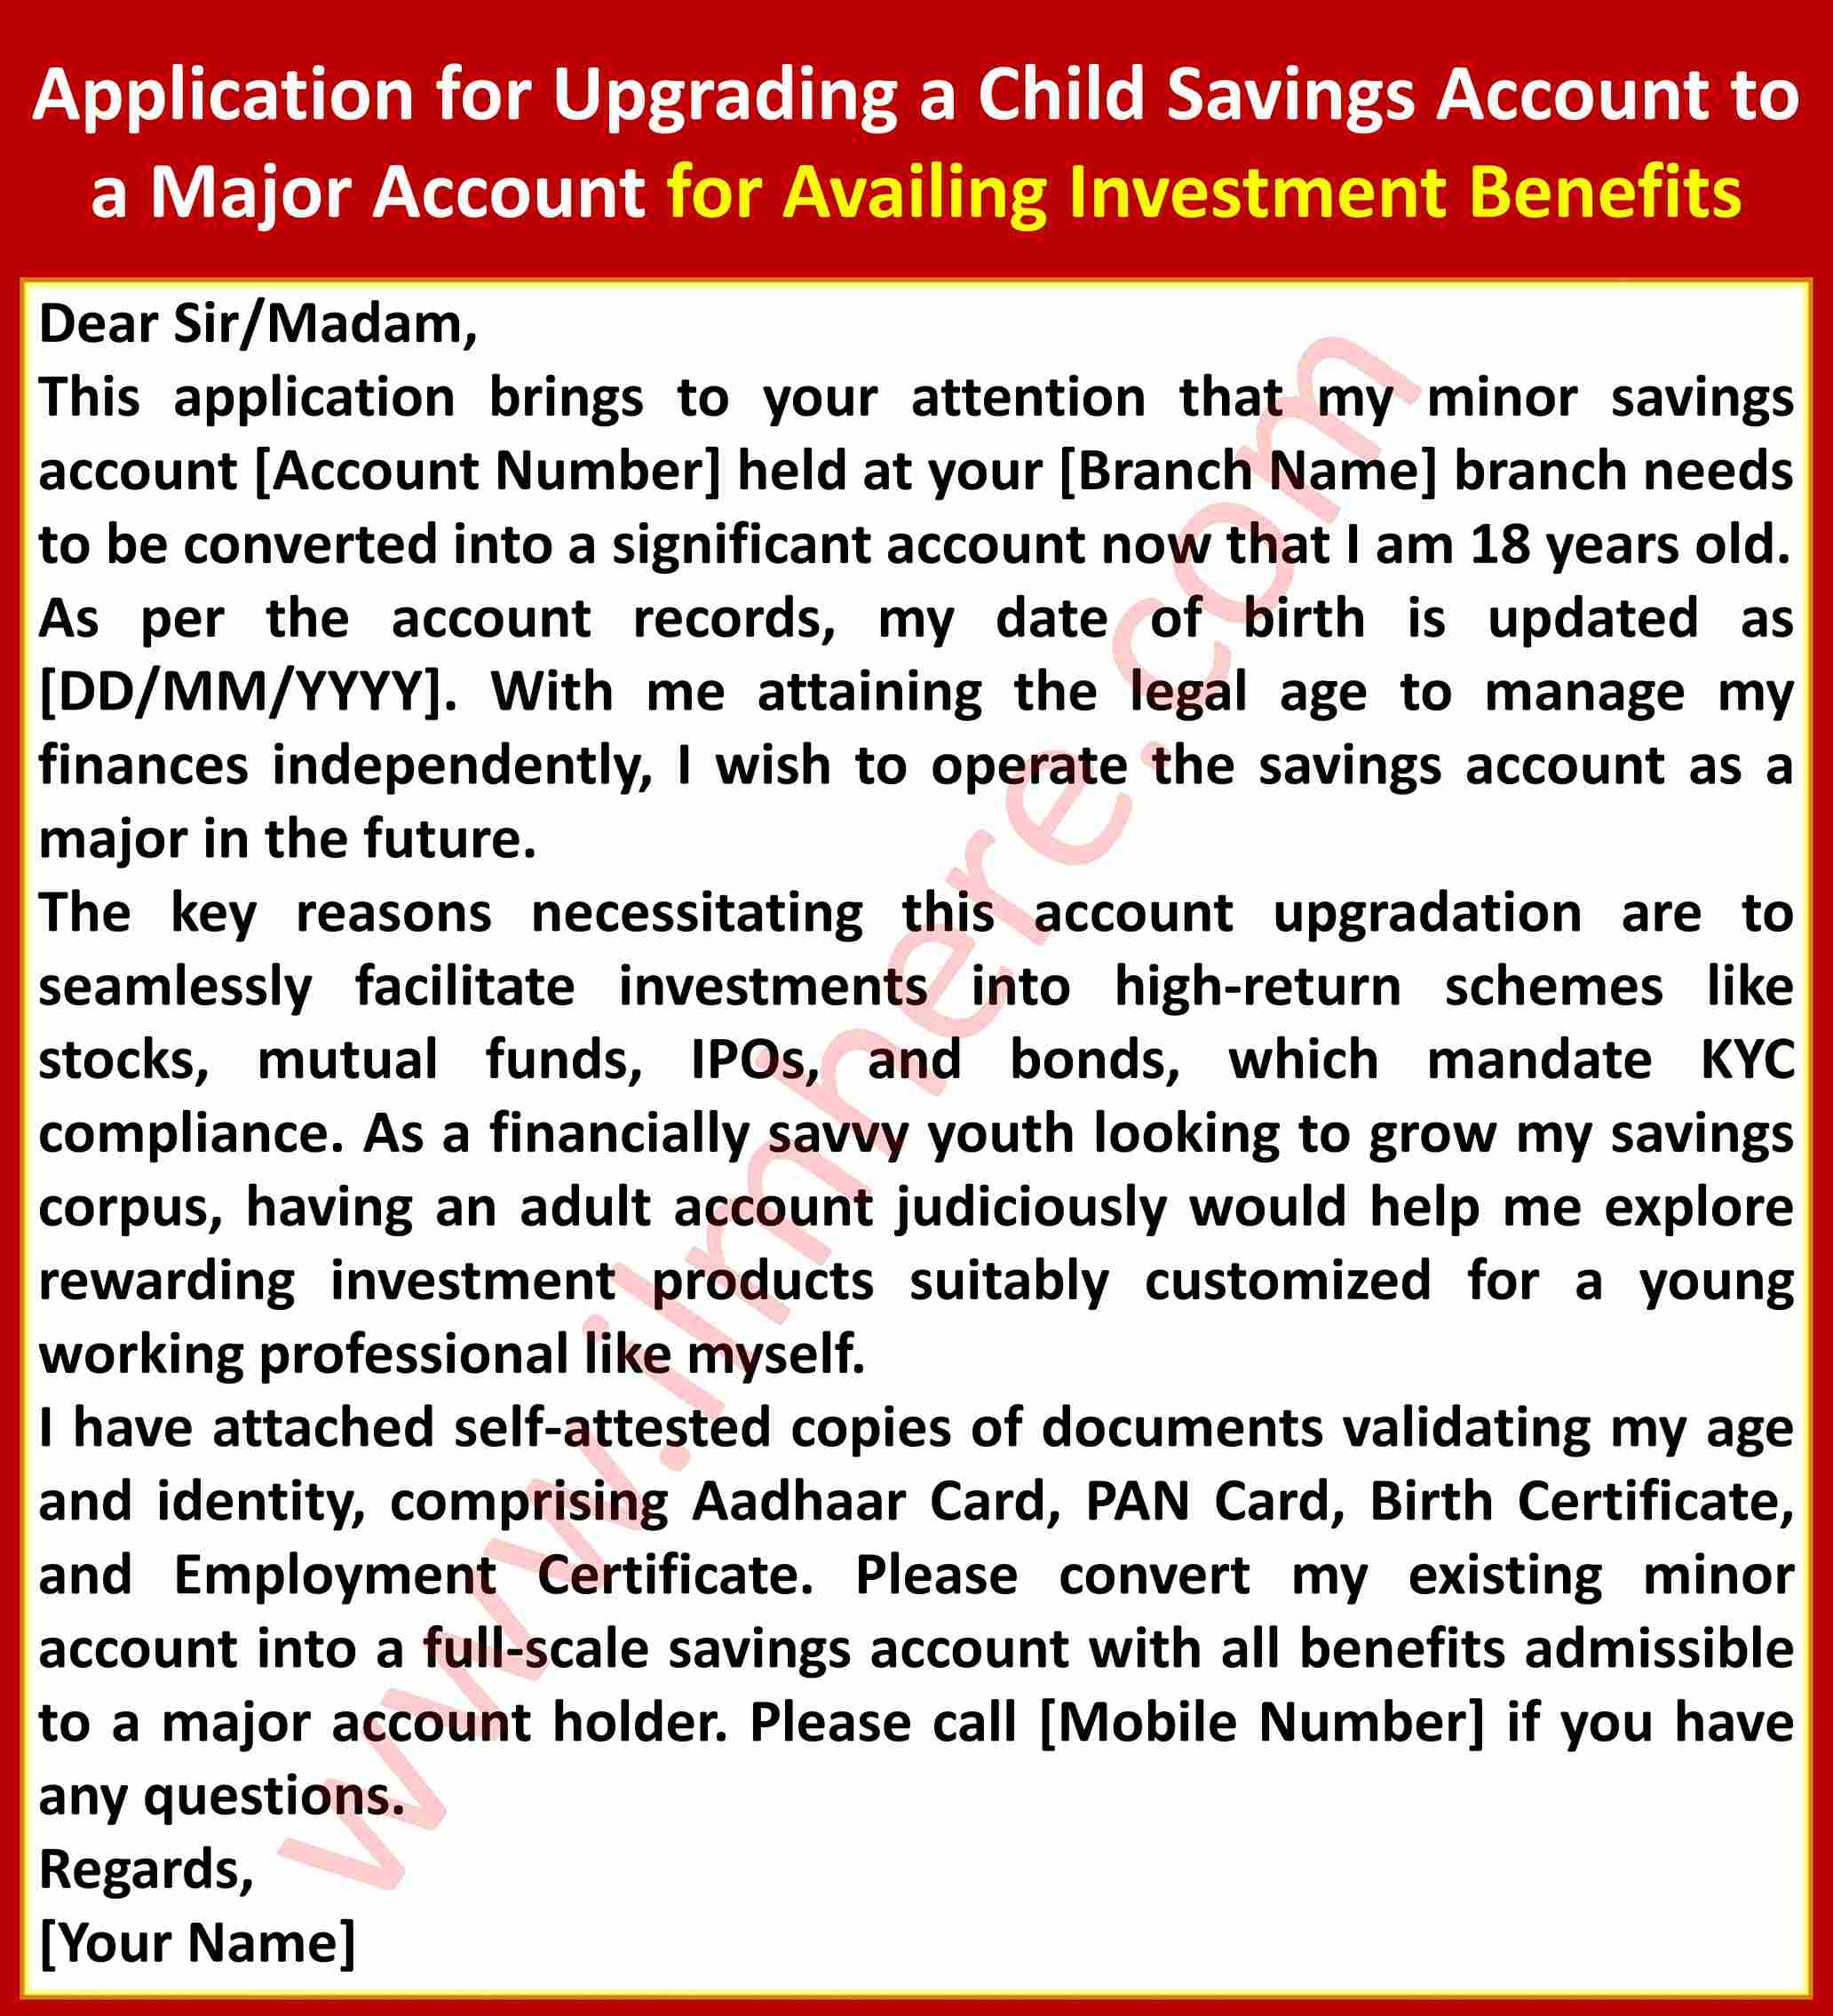 Application for Upgrading a Child Savings Account to a Major Account for Availing Investment Benefits